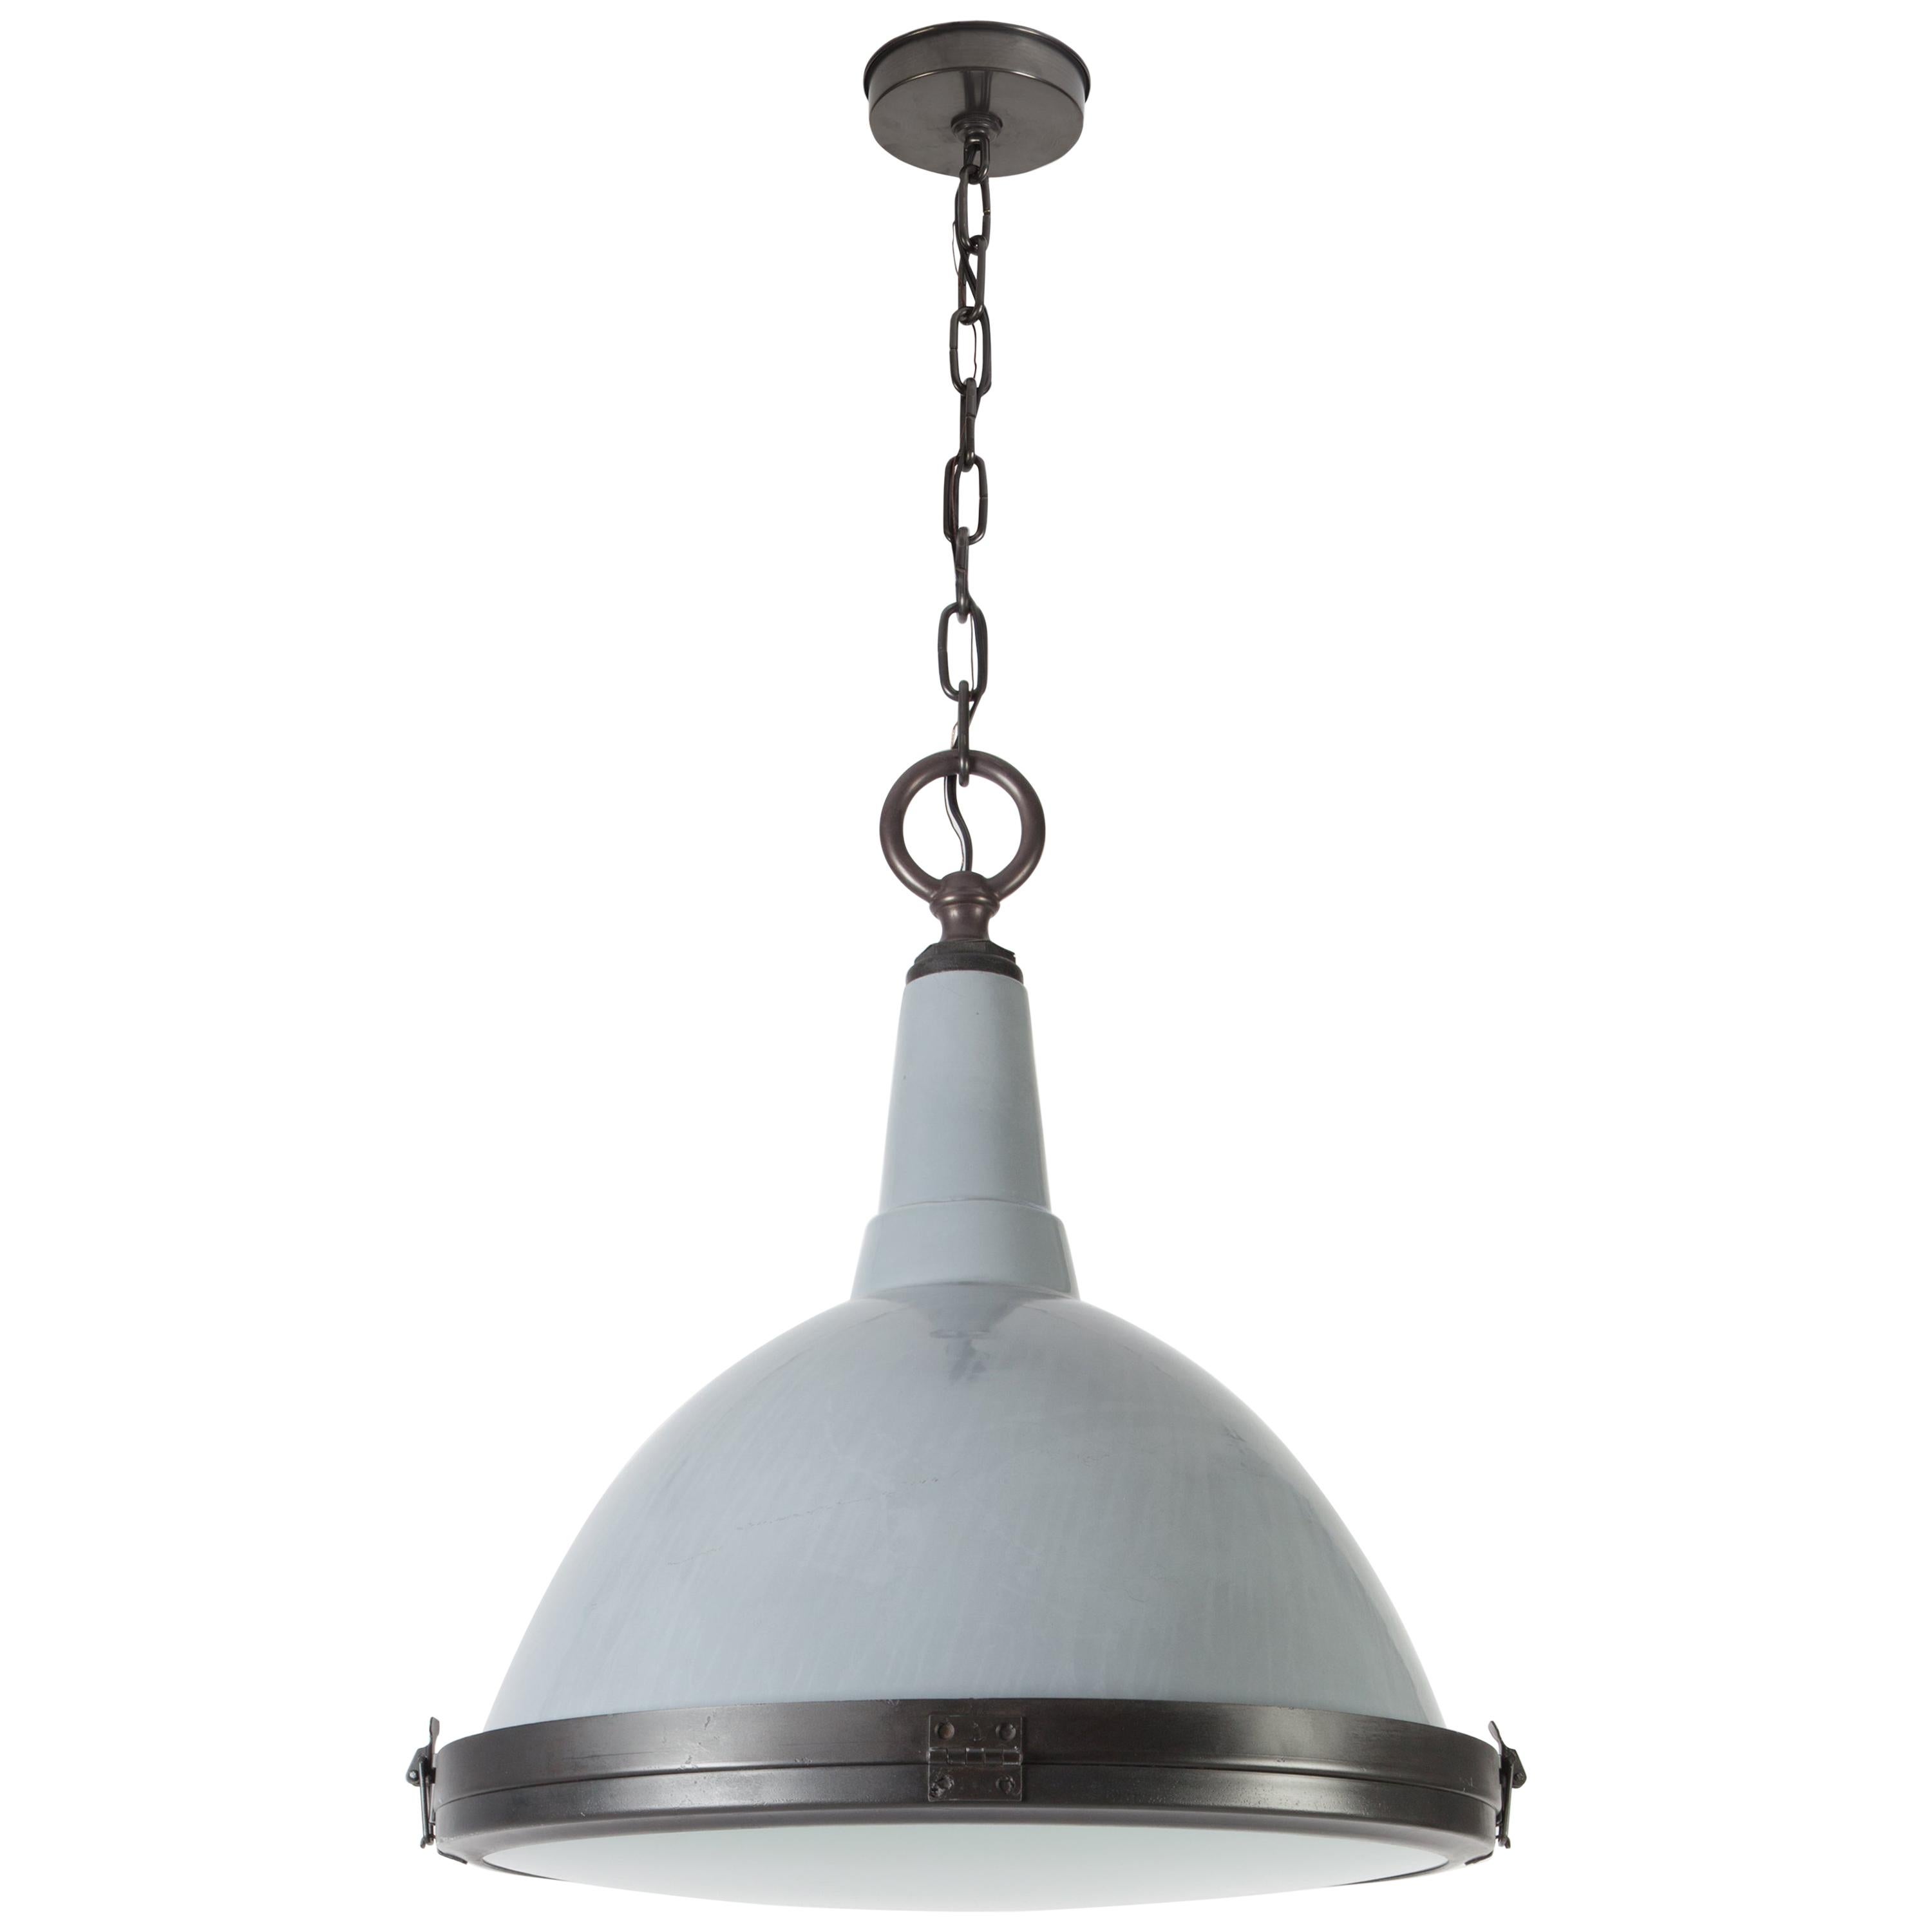 Industrial Enameled Pendant with Darkened Brass and Steel Fittings, circa 1950